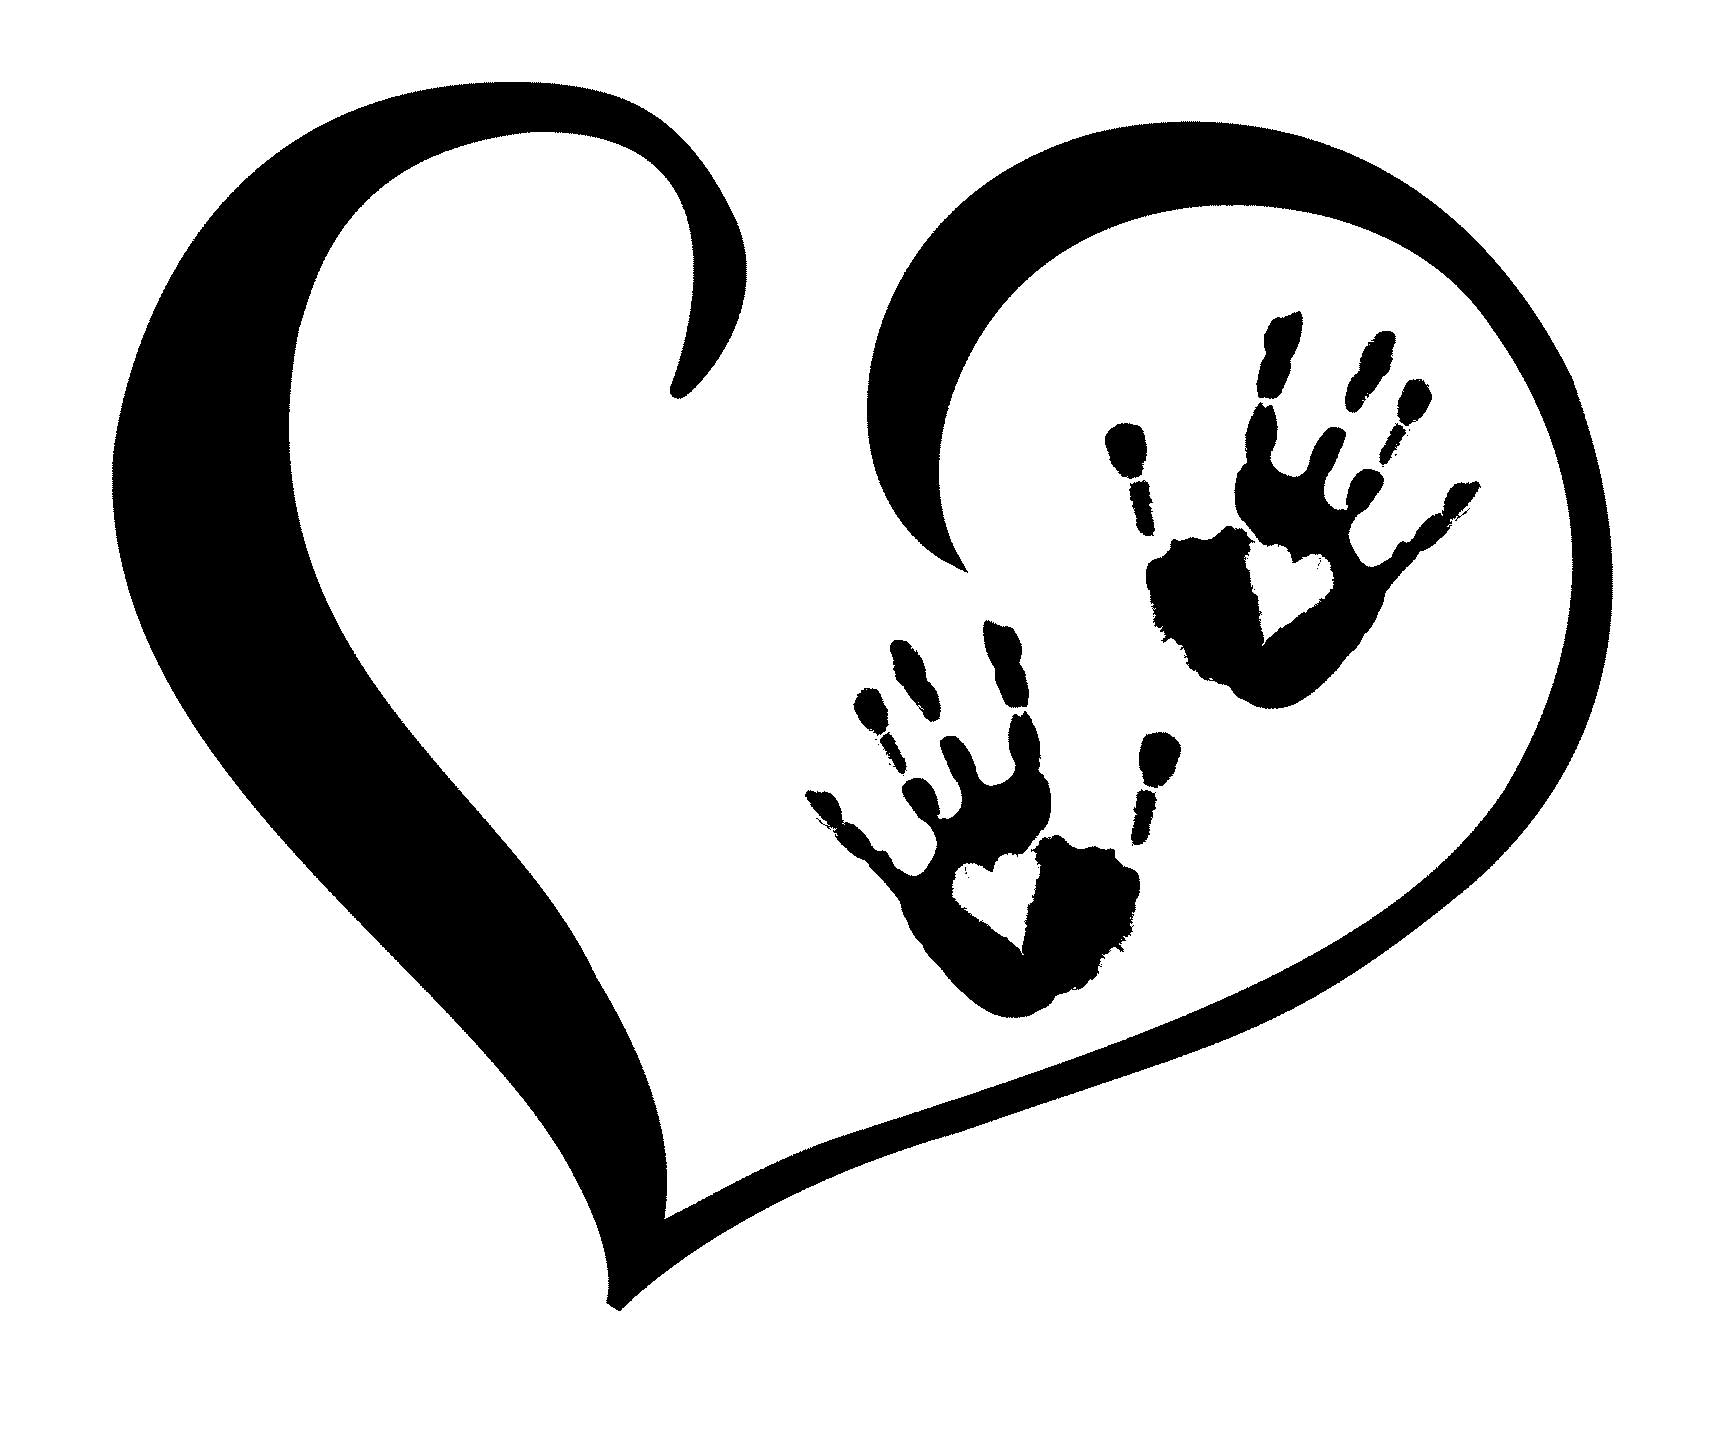 Hand in heart clipart